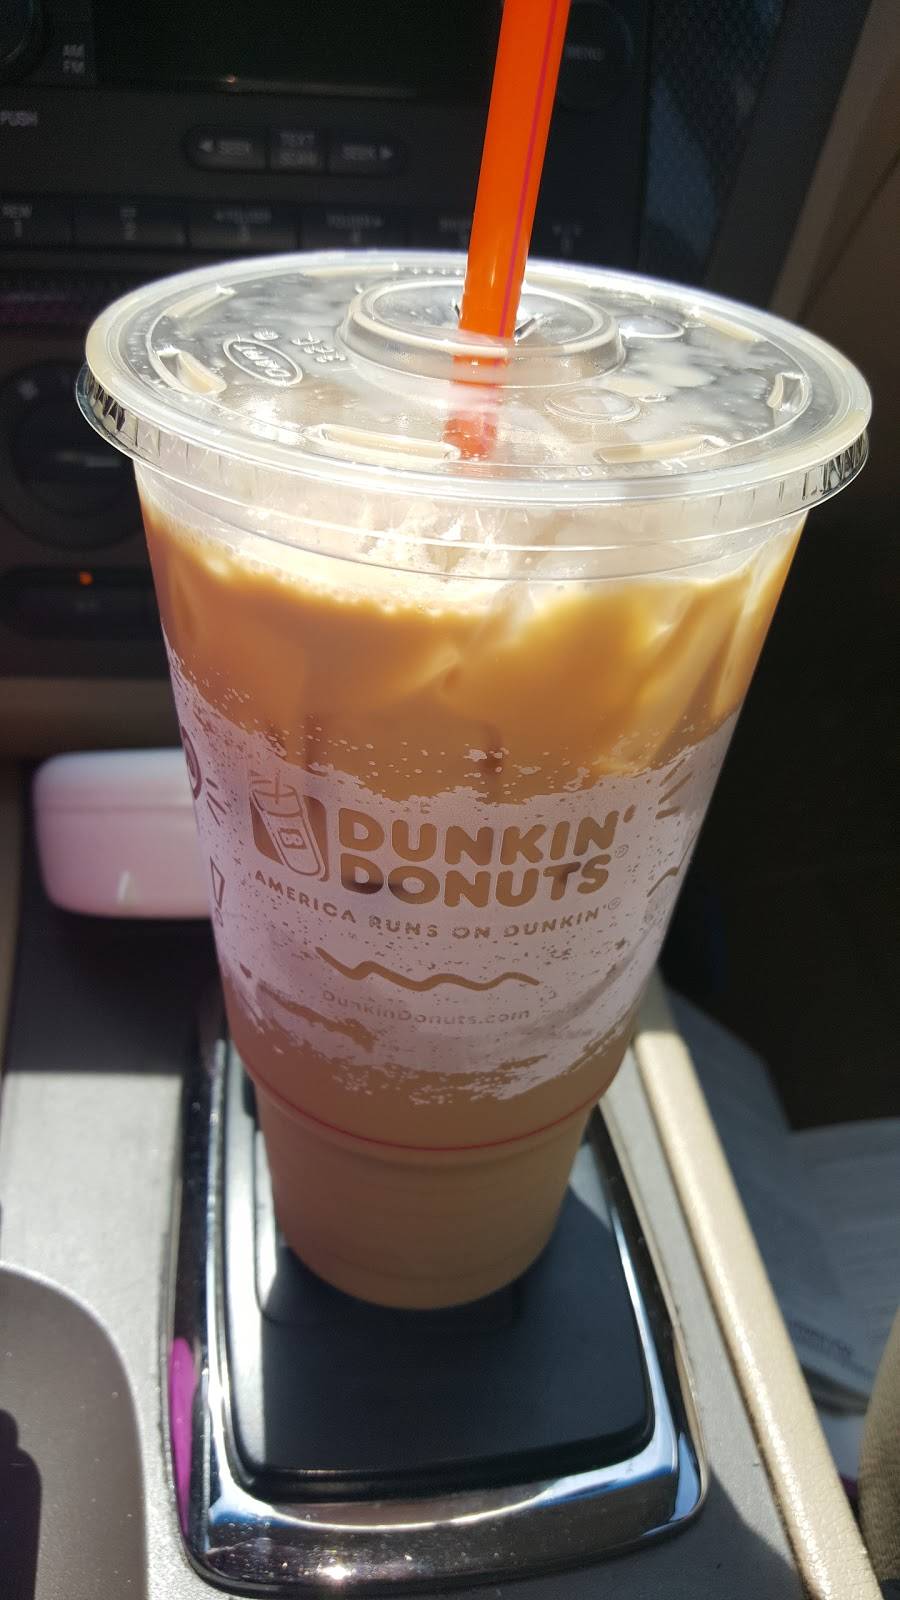 Dunkin Donuts | cafe | 429 US-46, Little Ferry, NJ 07643, USA | 2014403816 OR +1 201-440-3816